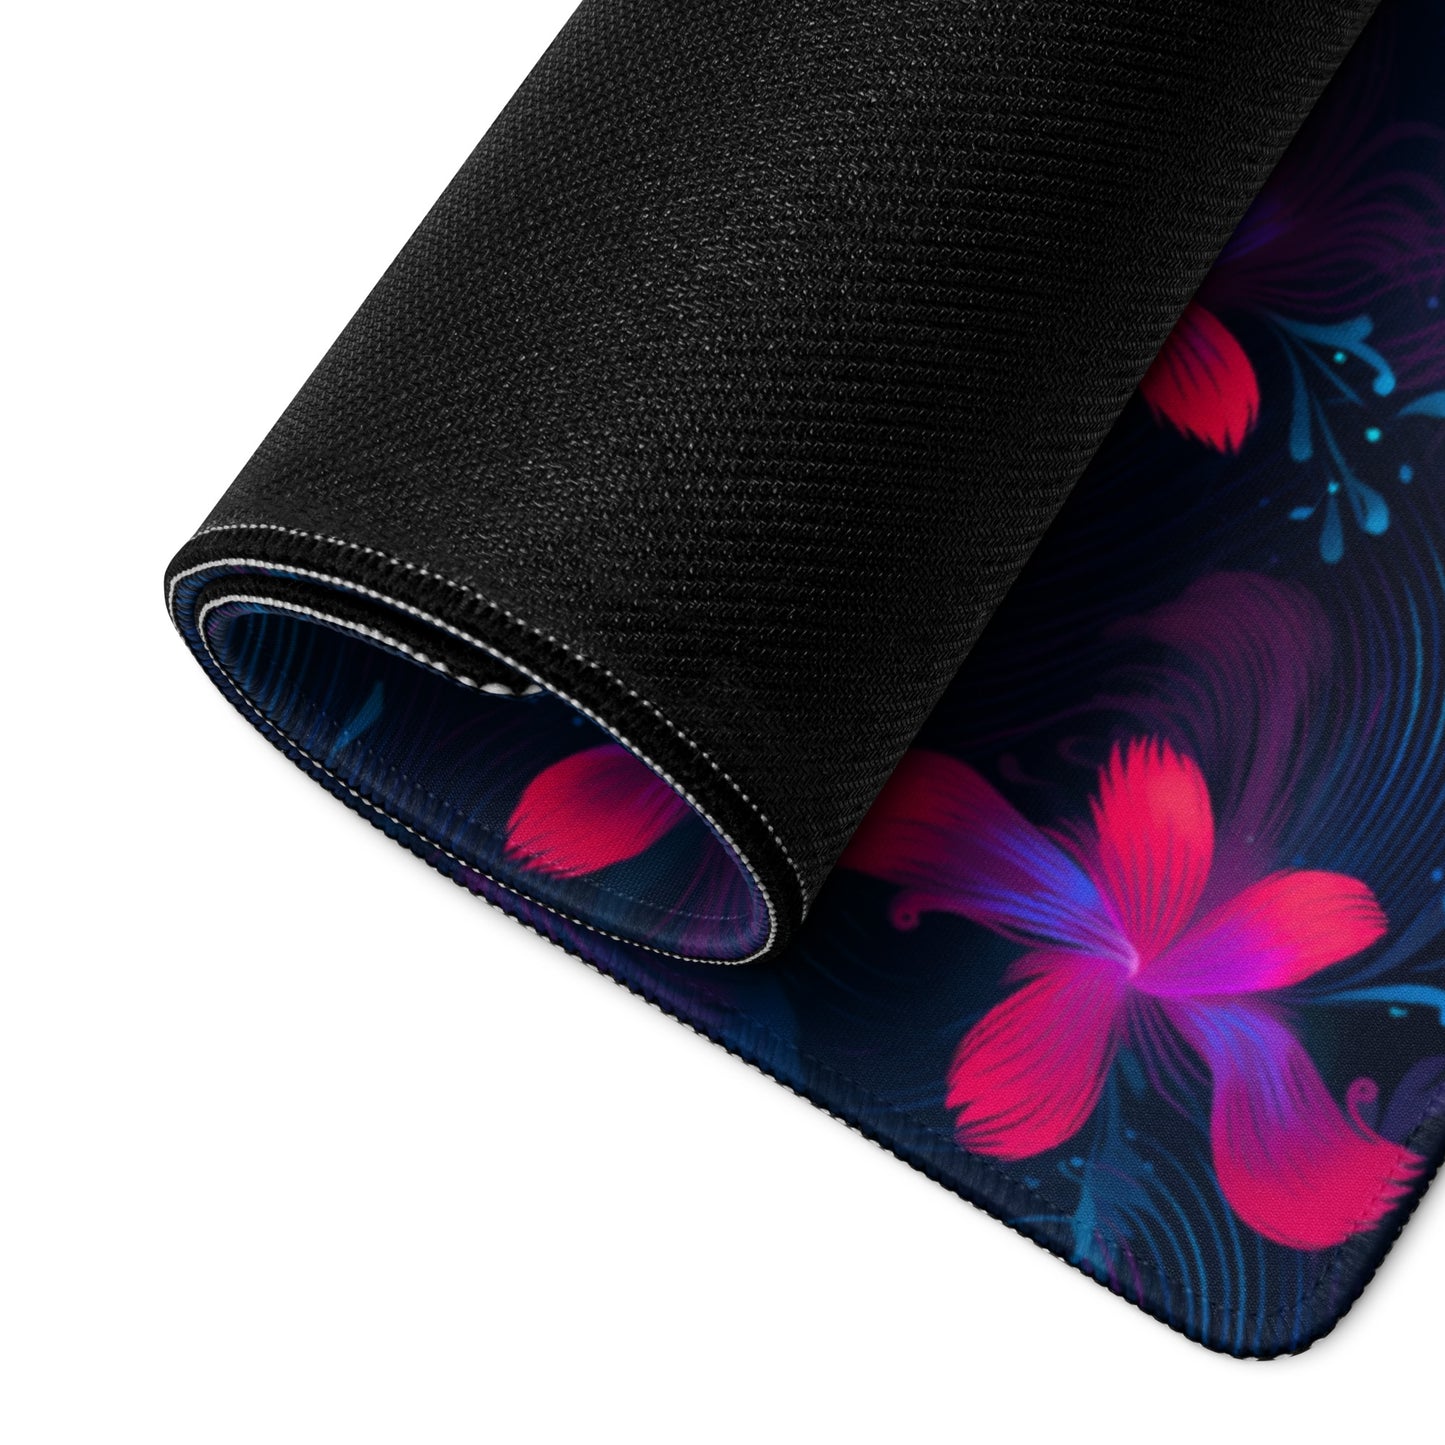 A 36" x 18" desk pad with neon pink and blue floral pattern rolled up.